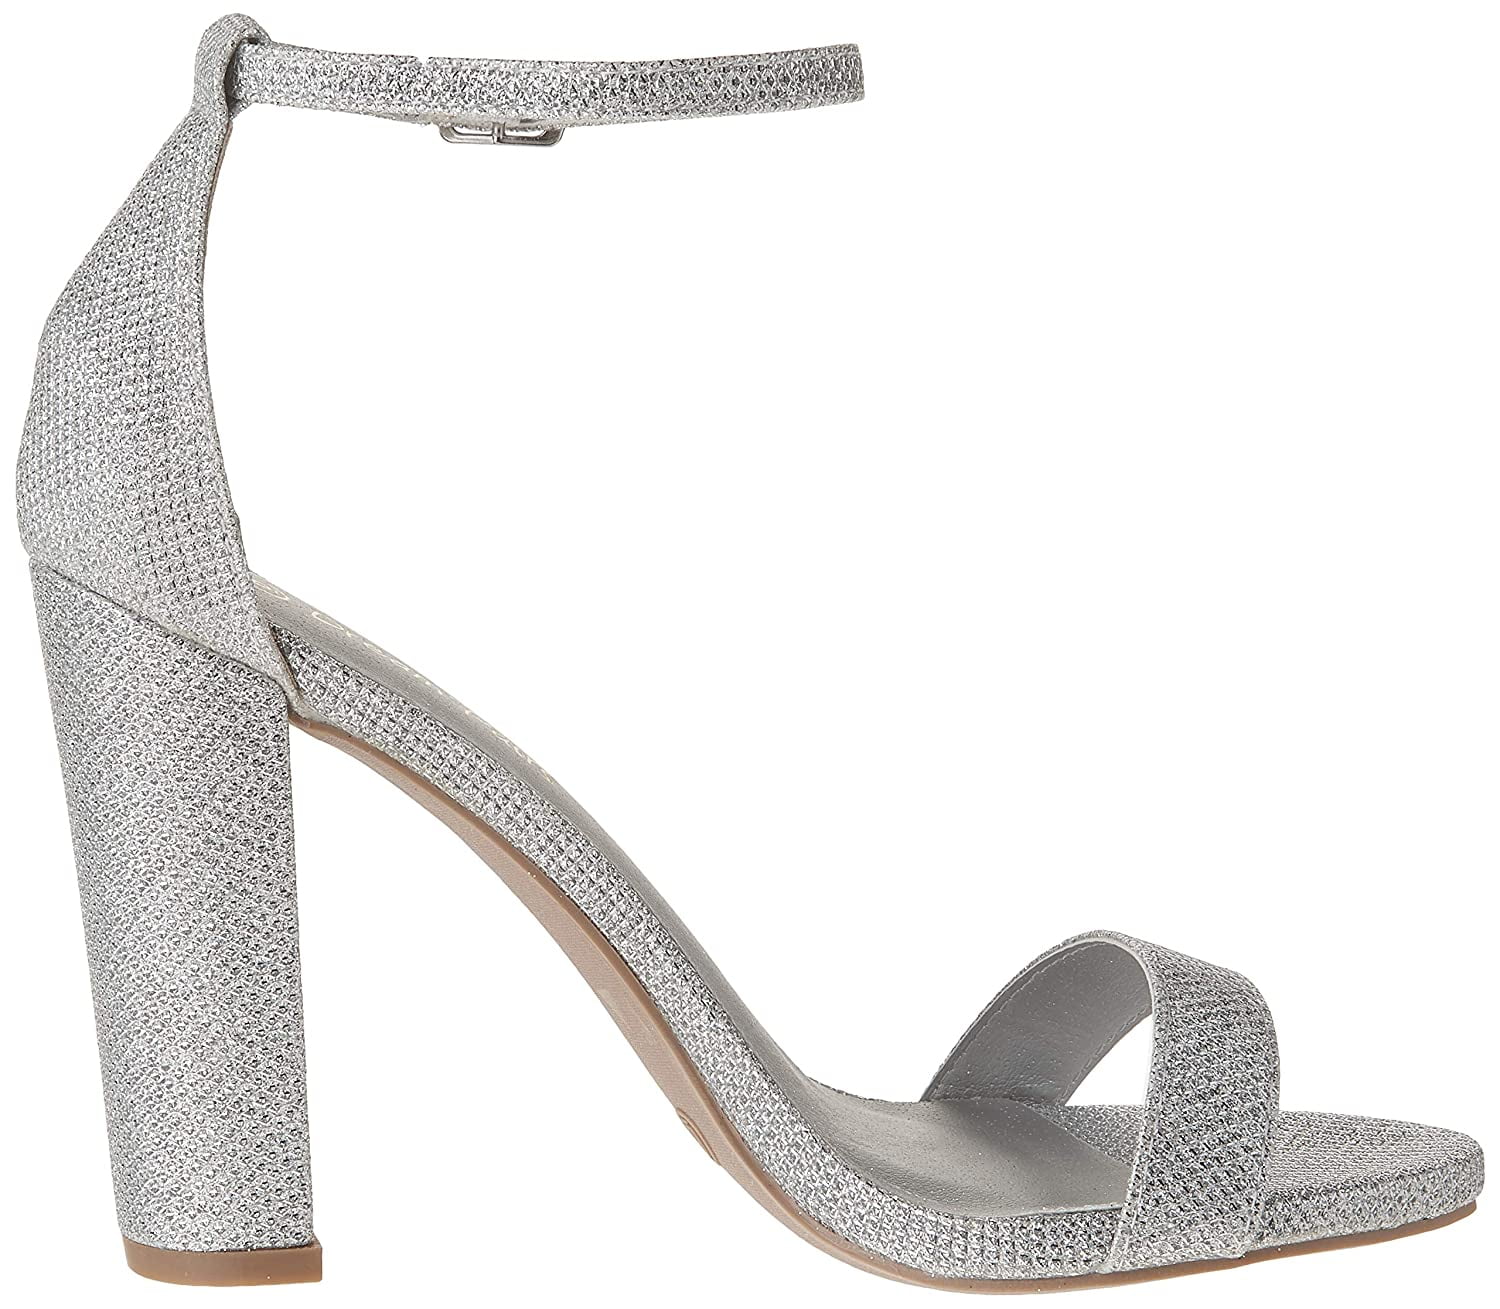 Ellie Shoes 557-SPARKLE Silver in Sexy Heels & Platforms - $58.07